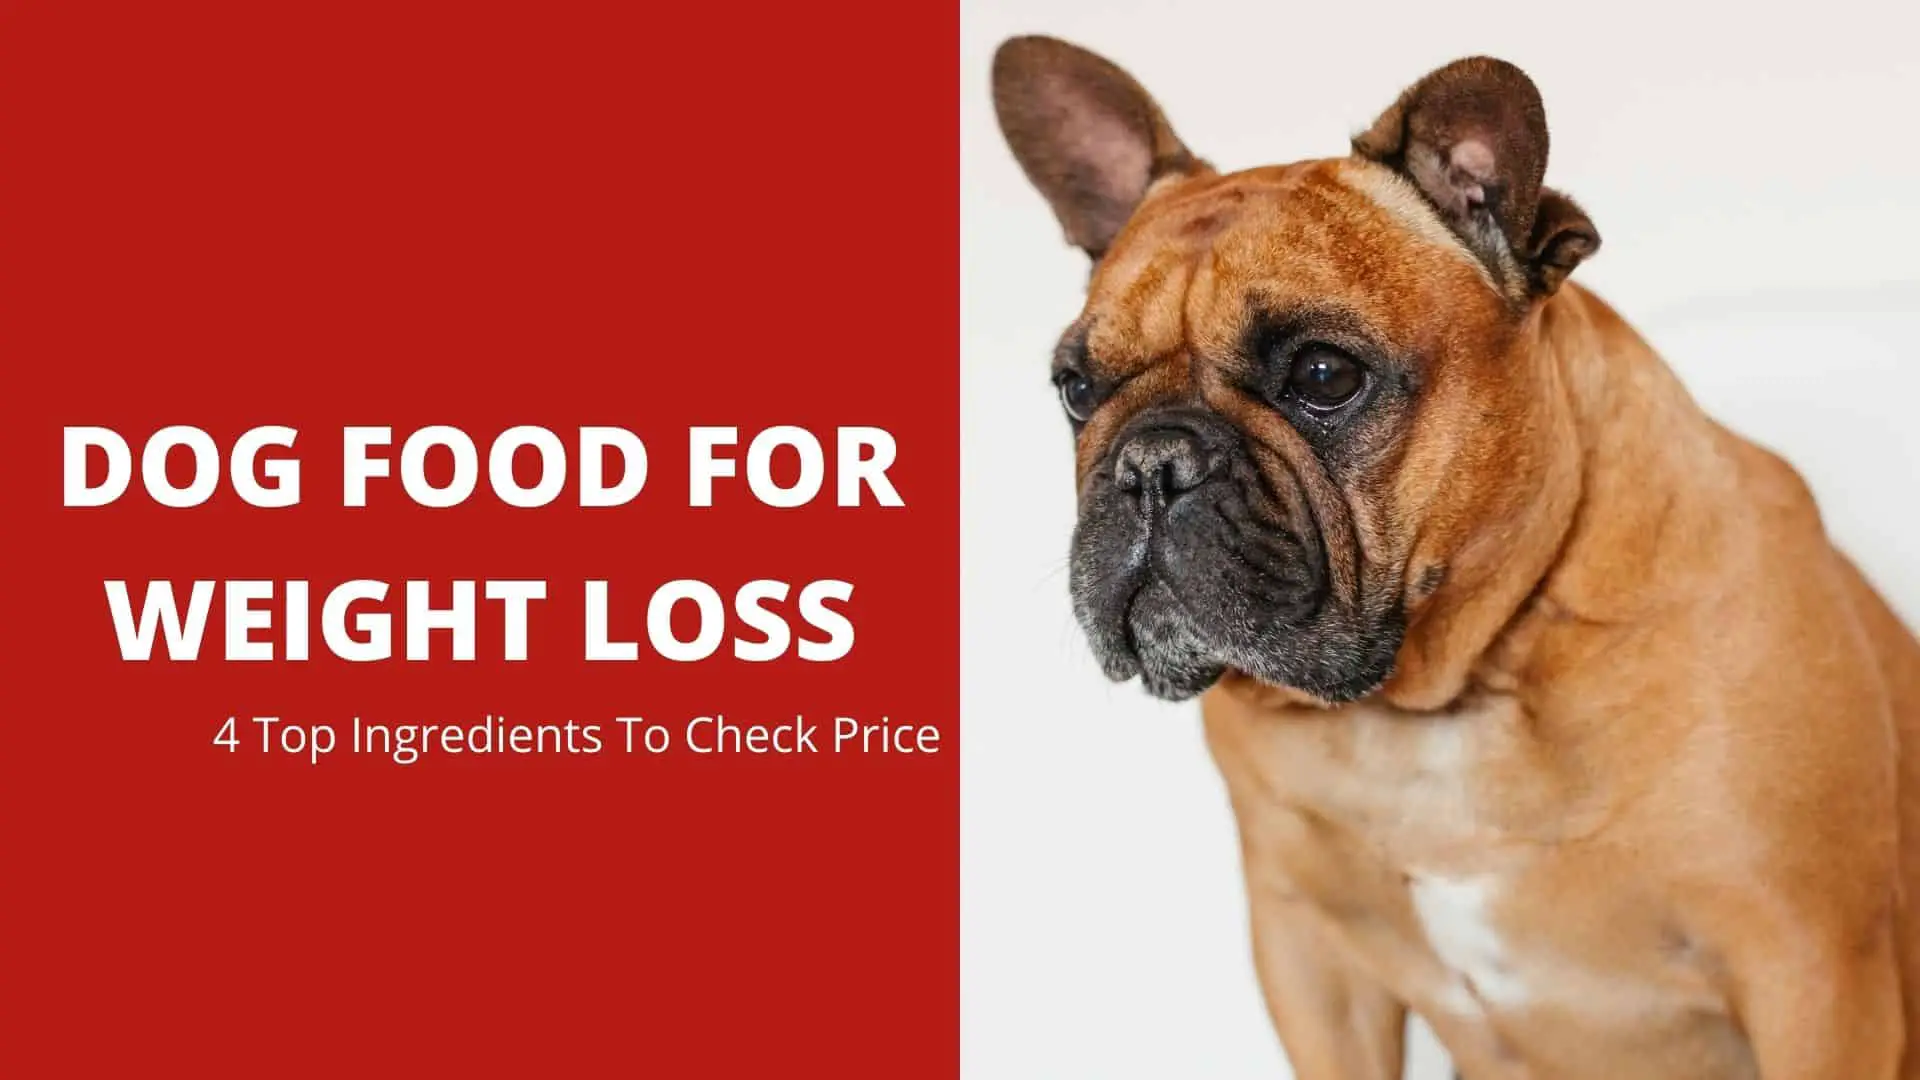 Dog Food For Weight Loss: 4 Top Ingredients To Check Price